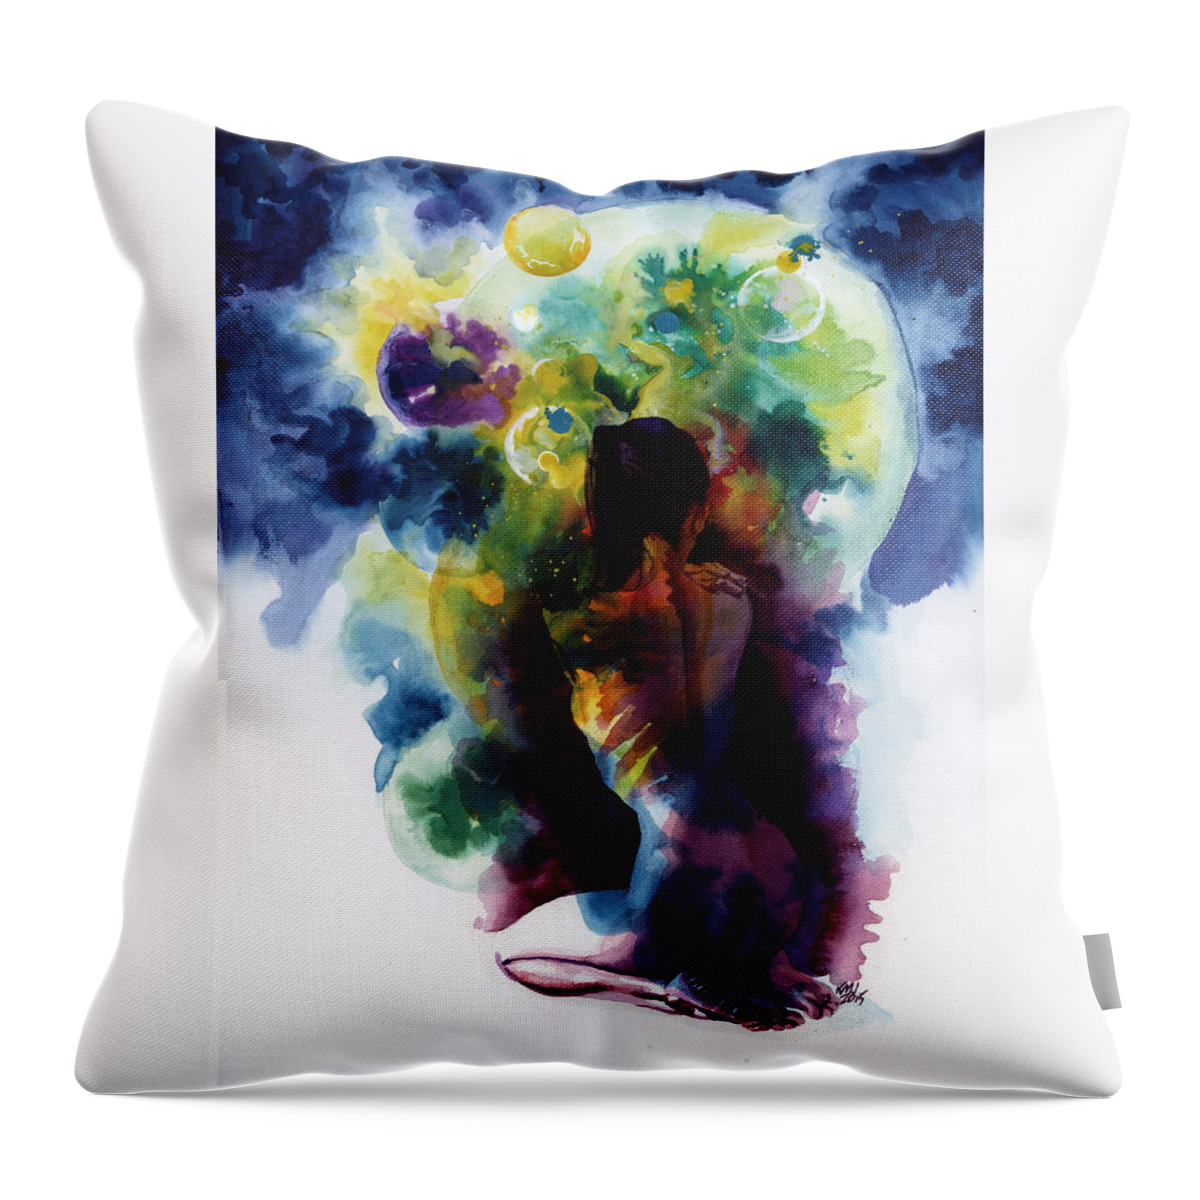 Nudes Throw Pillow featuring the painting Bareback Meld by Ken Meyer jr